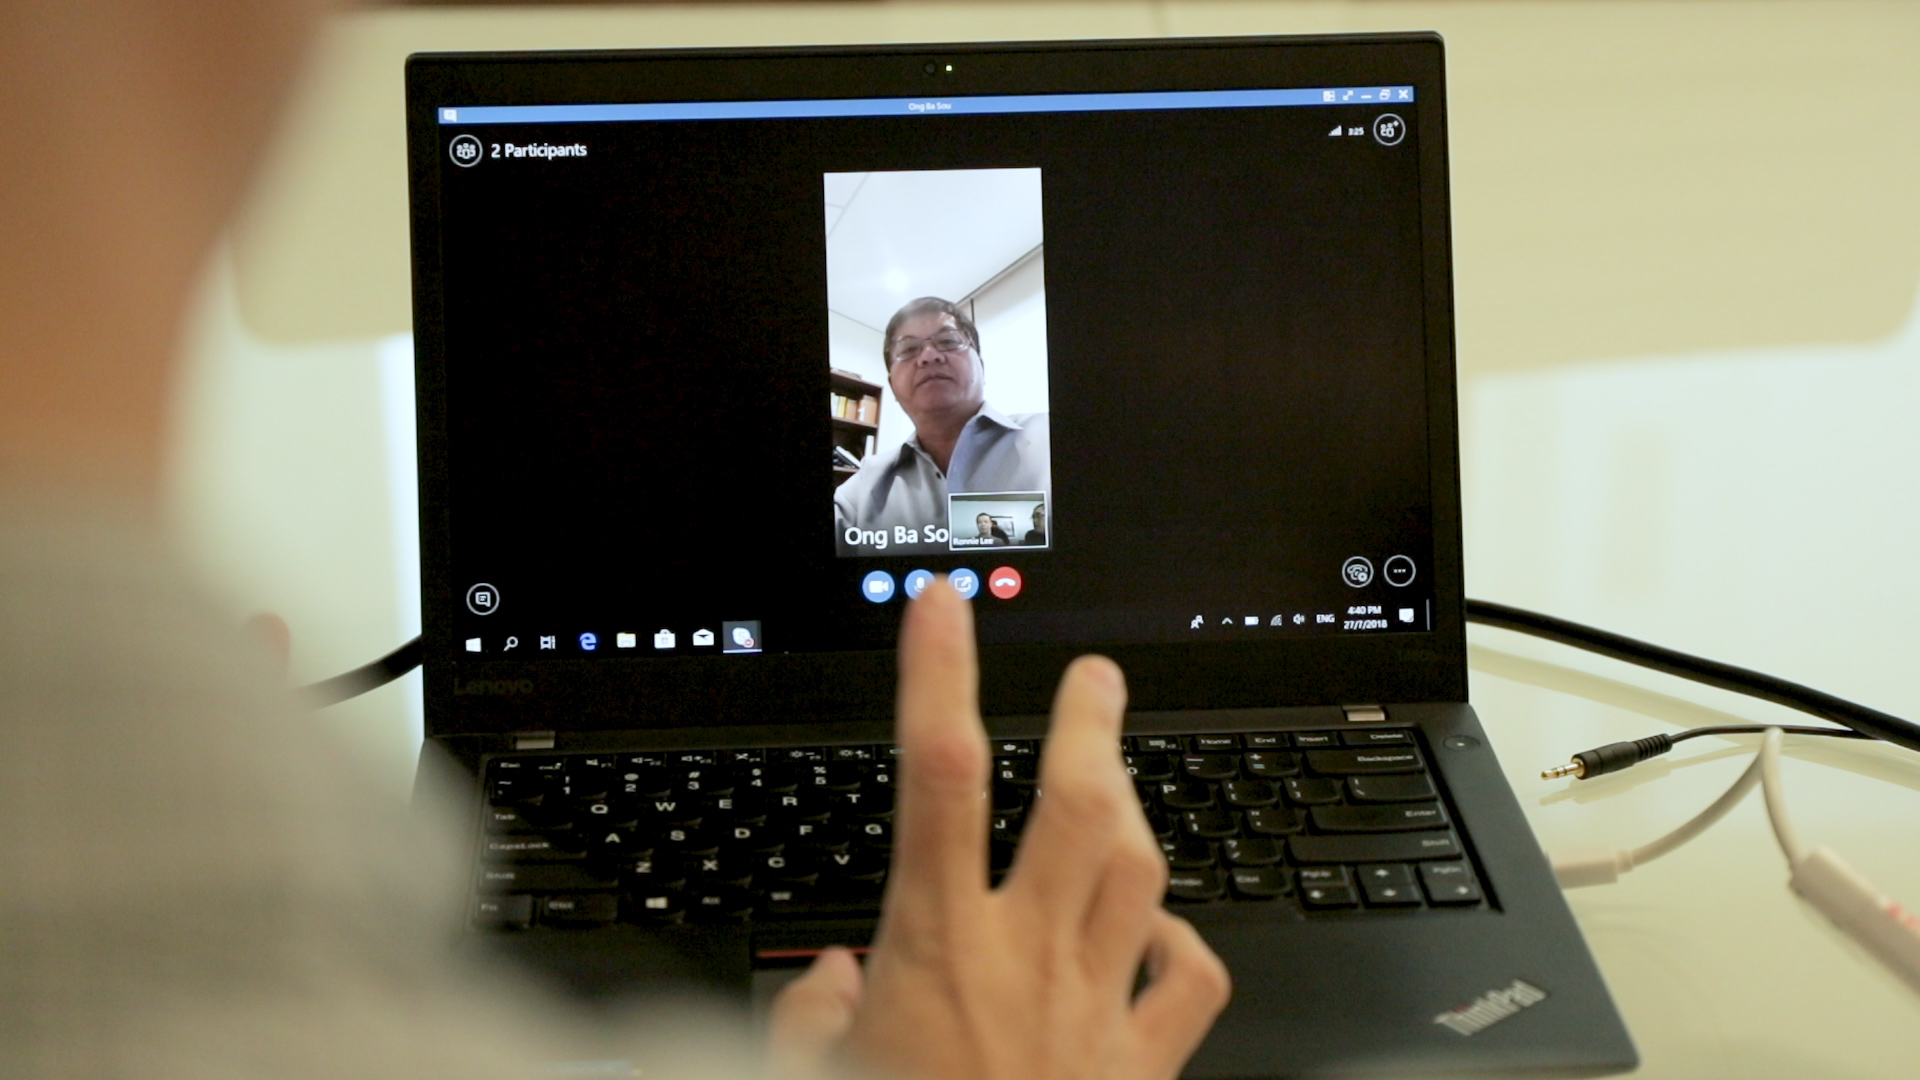 Staff using the Skype for Business on a laptop